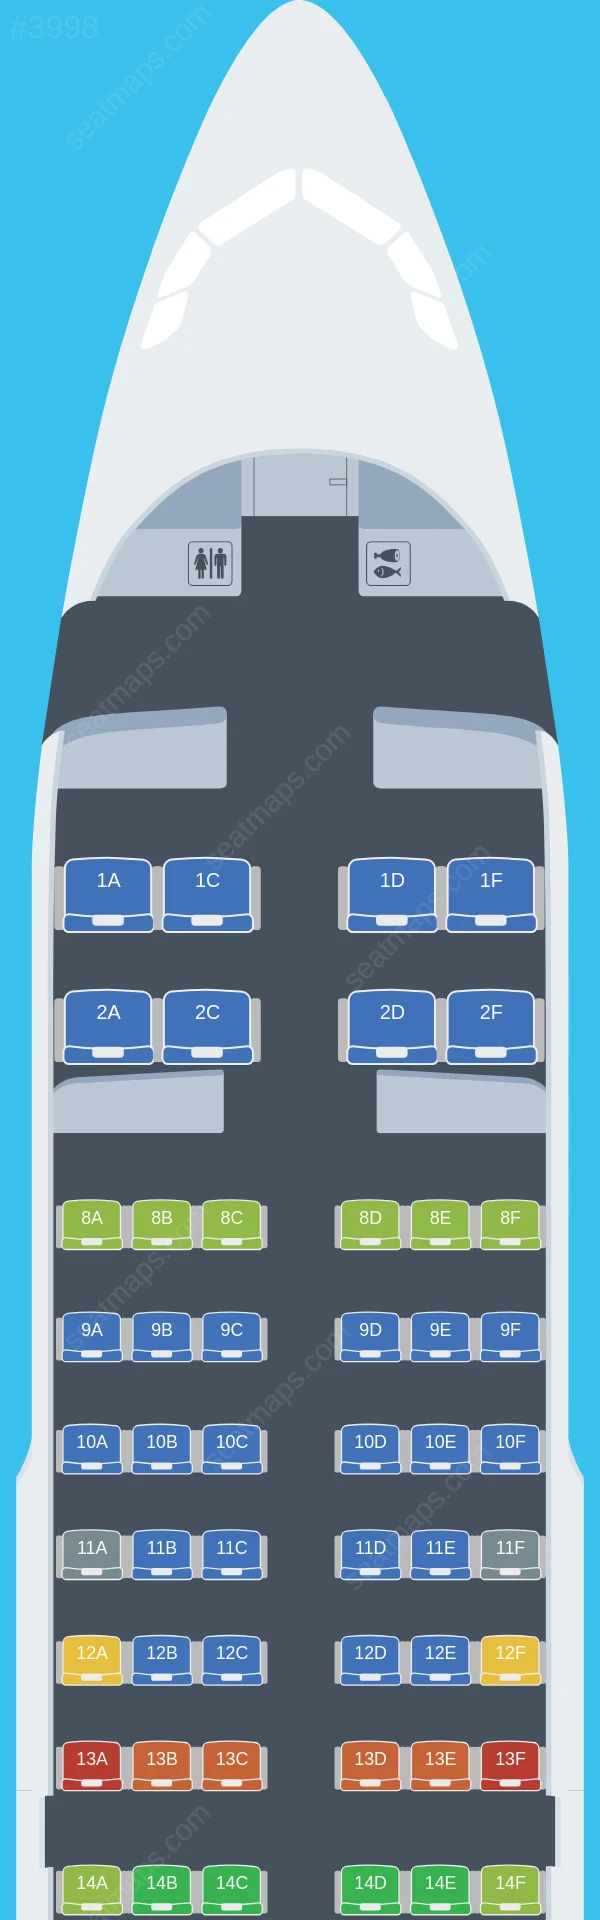 American Airlines Airbus A319-100 seatmap preview